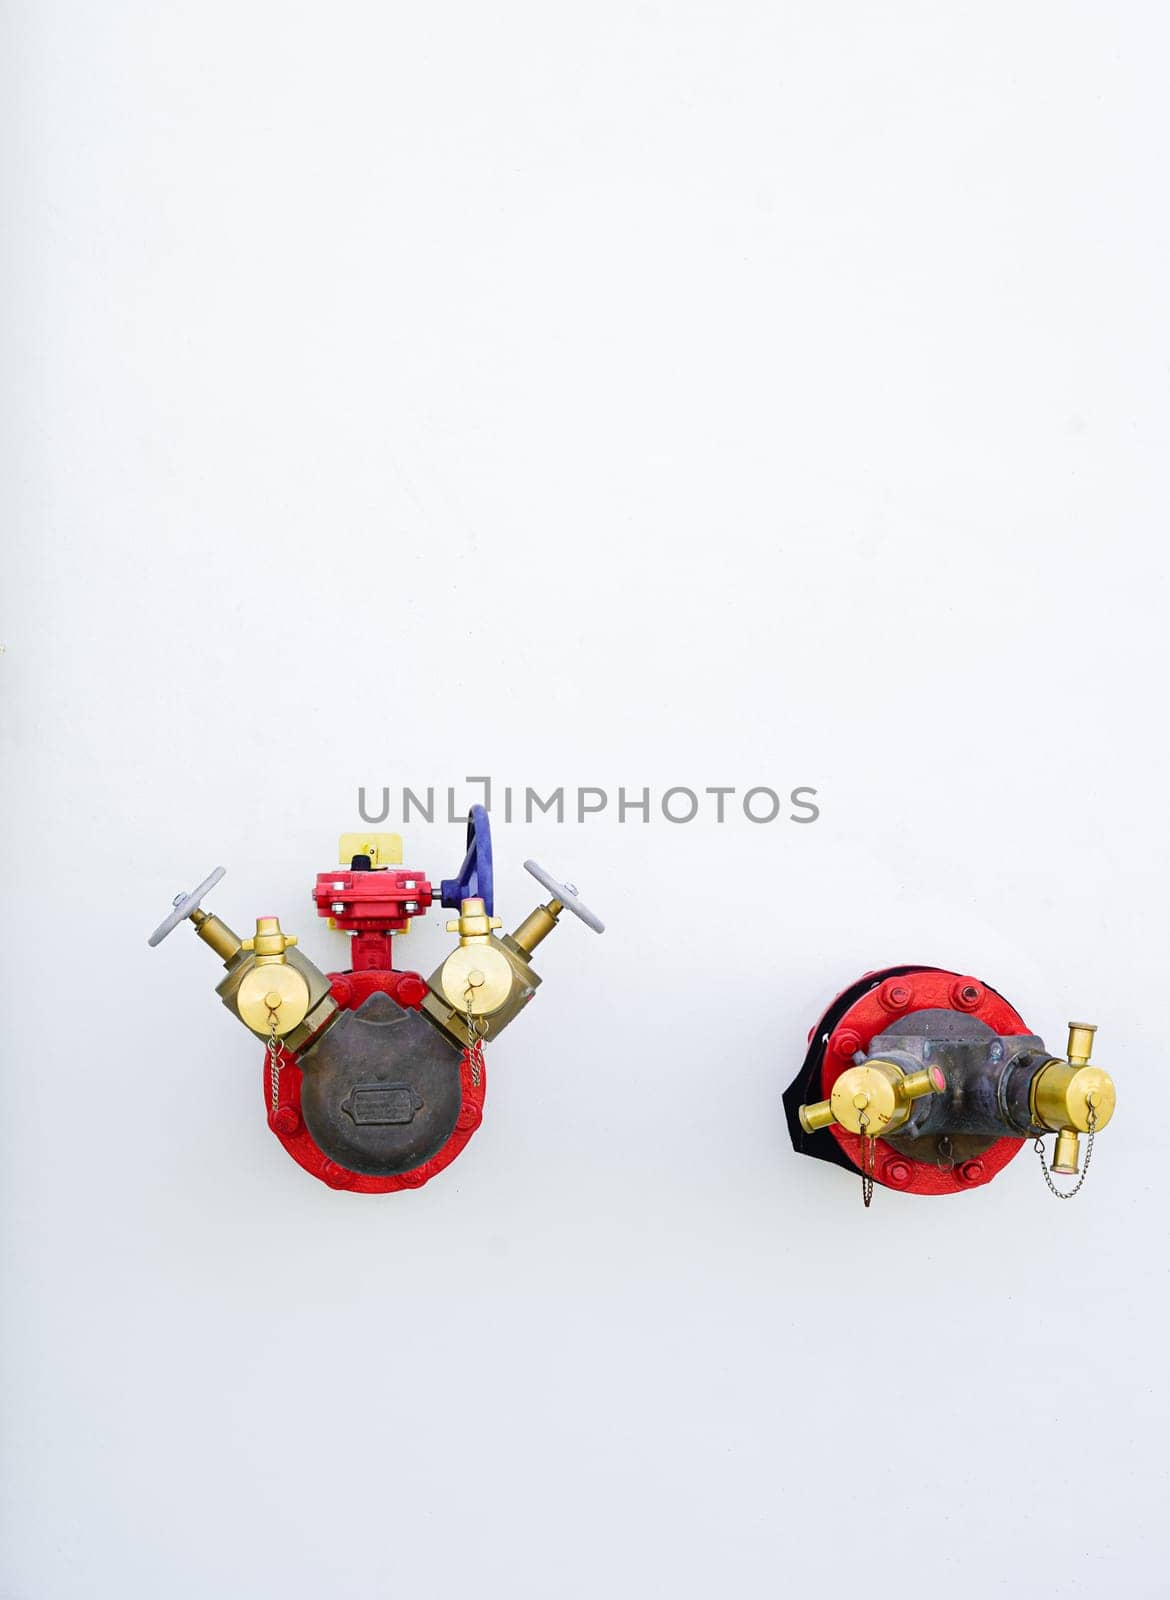 Red fire hydrant system, fire extinguishing system on white wall